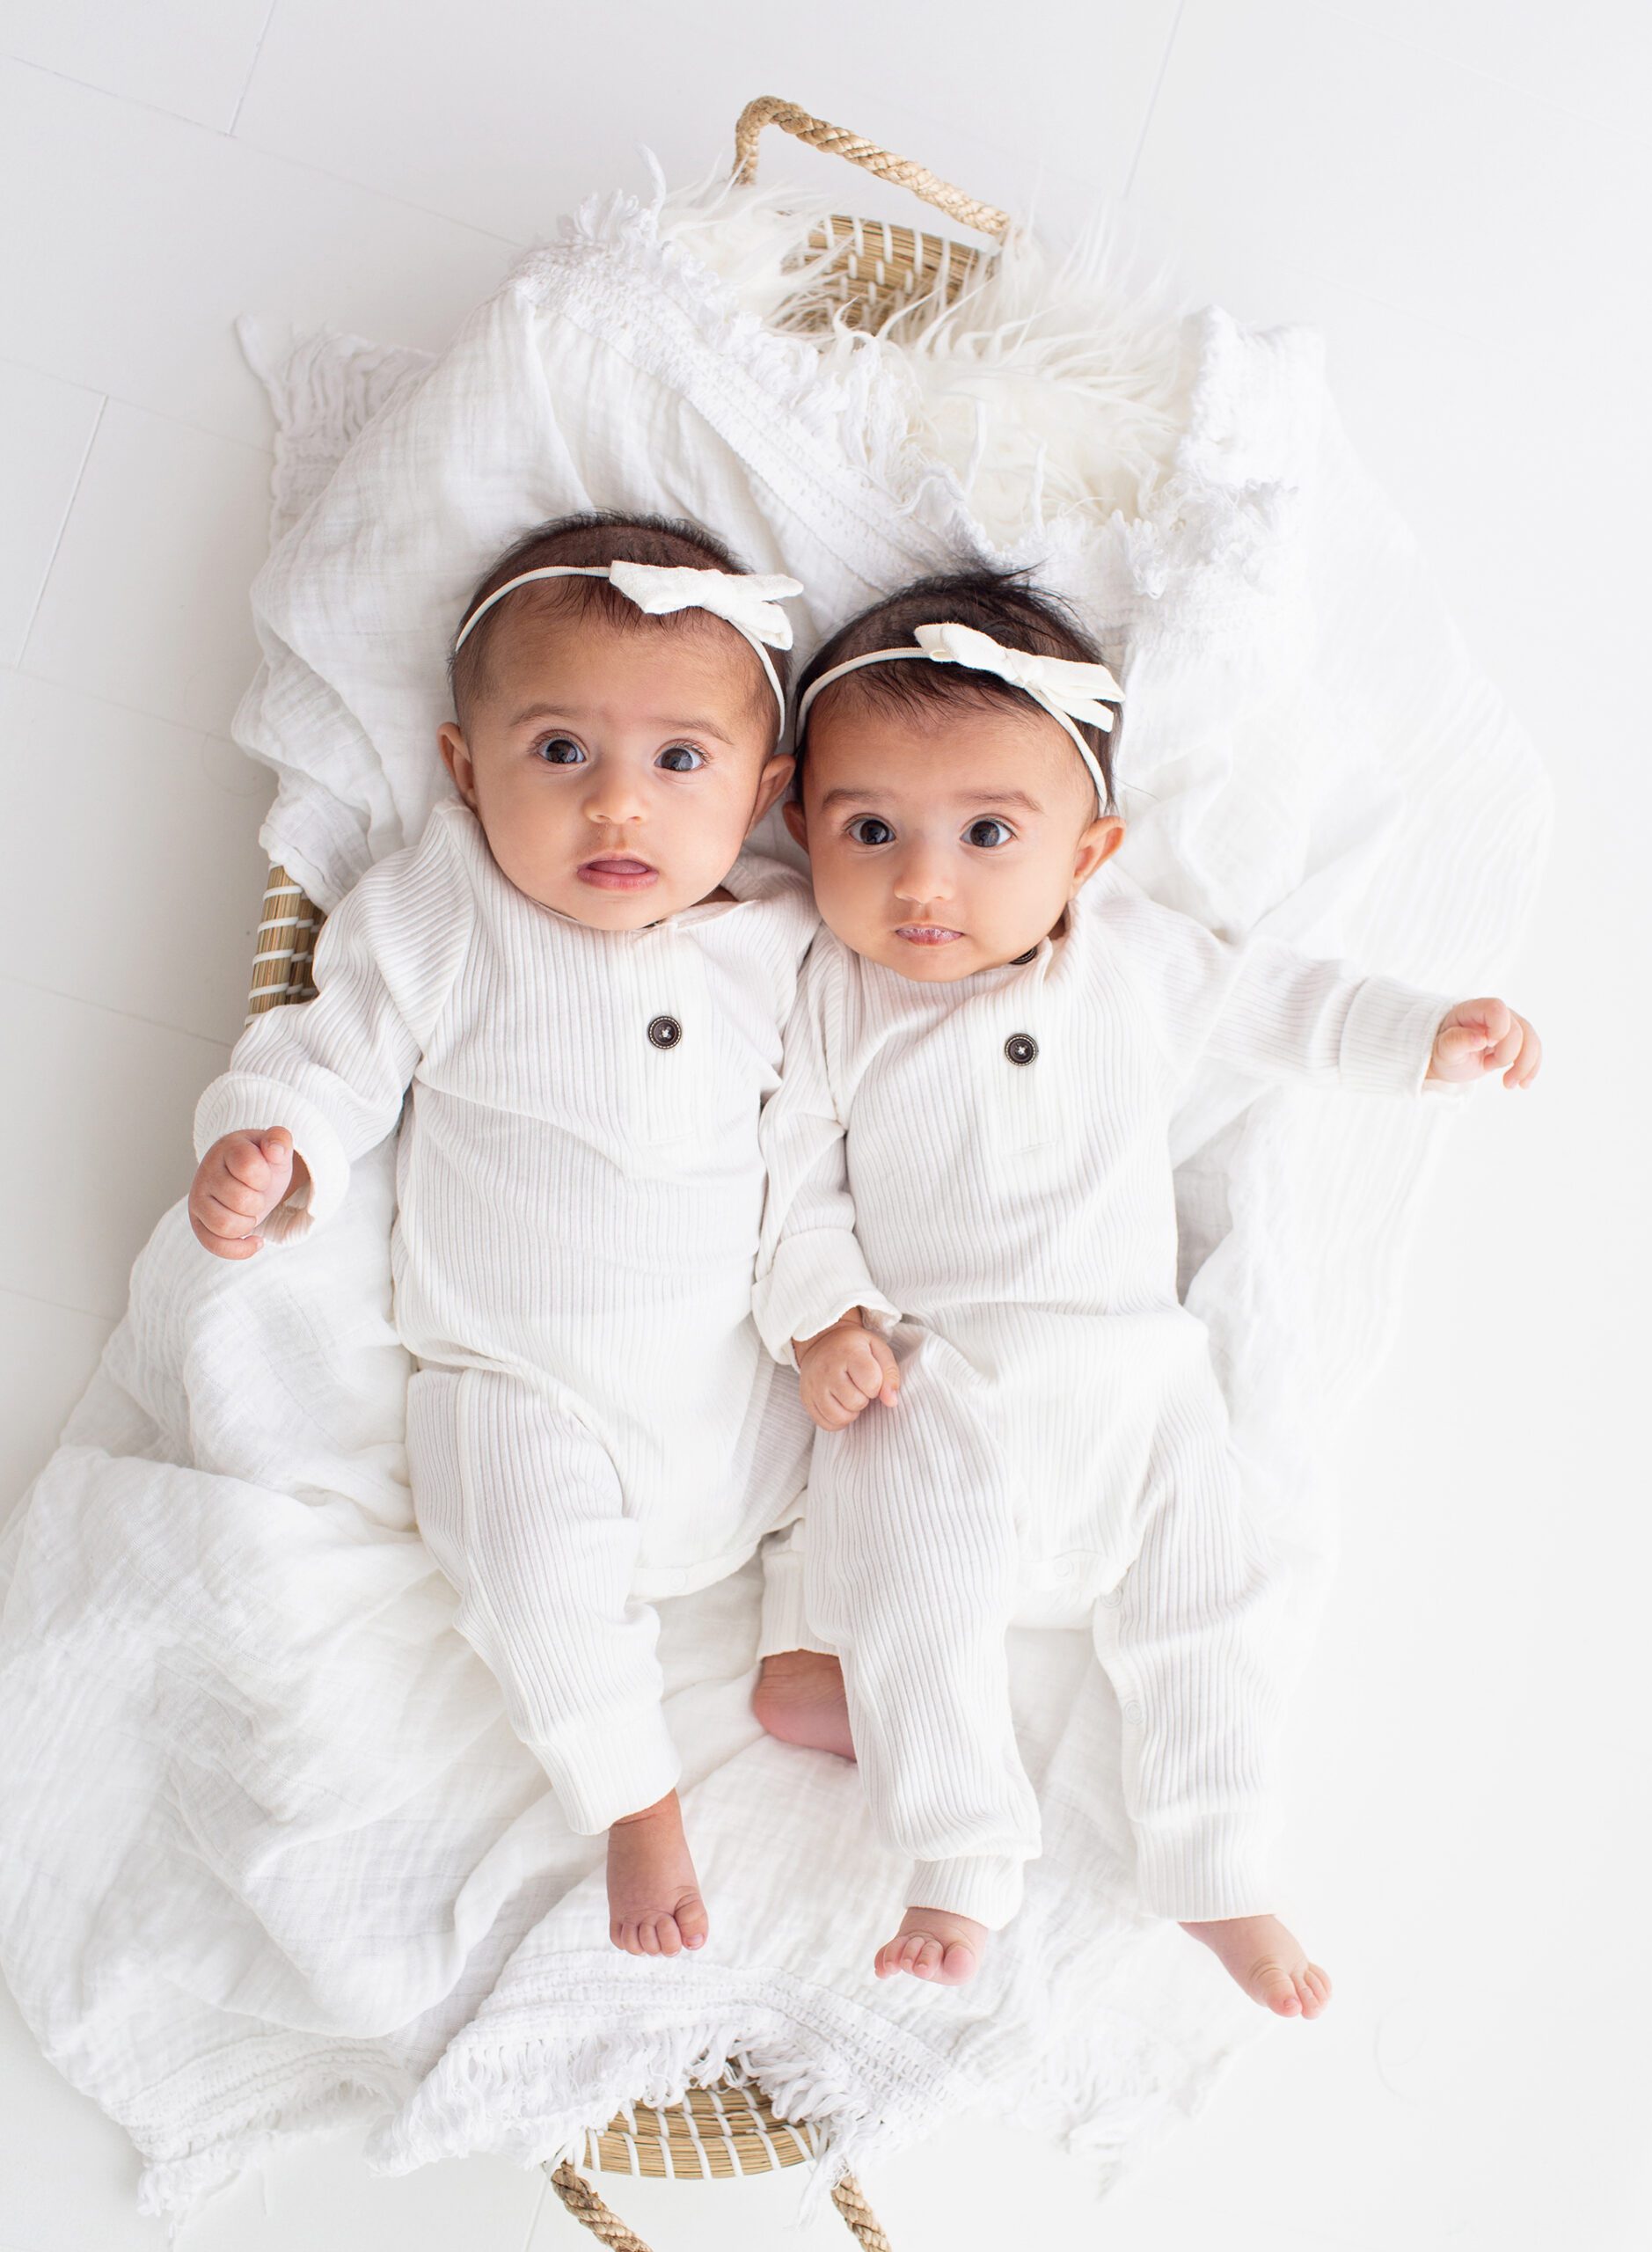 3 month old twin girls studio family session by mississauga older newborn photographer hope and salt_26